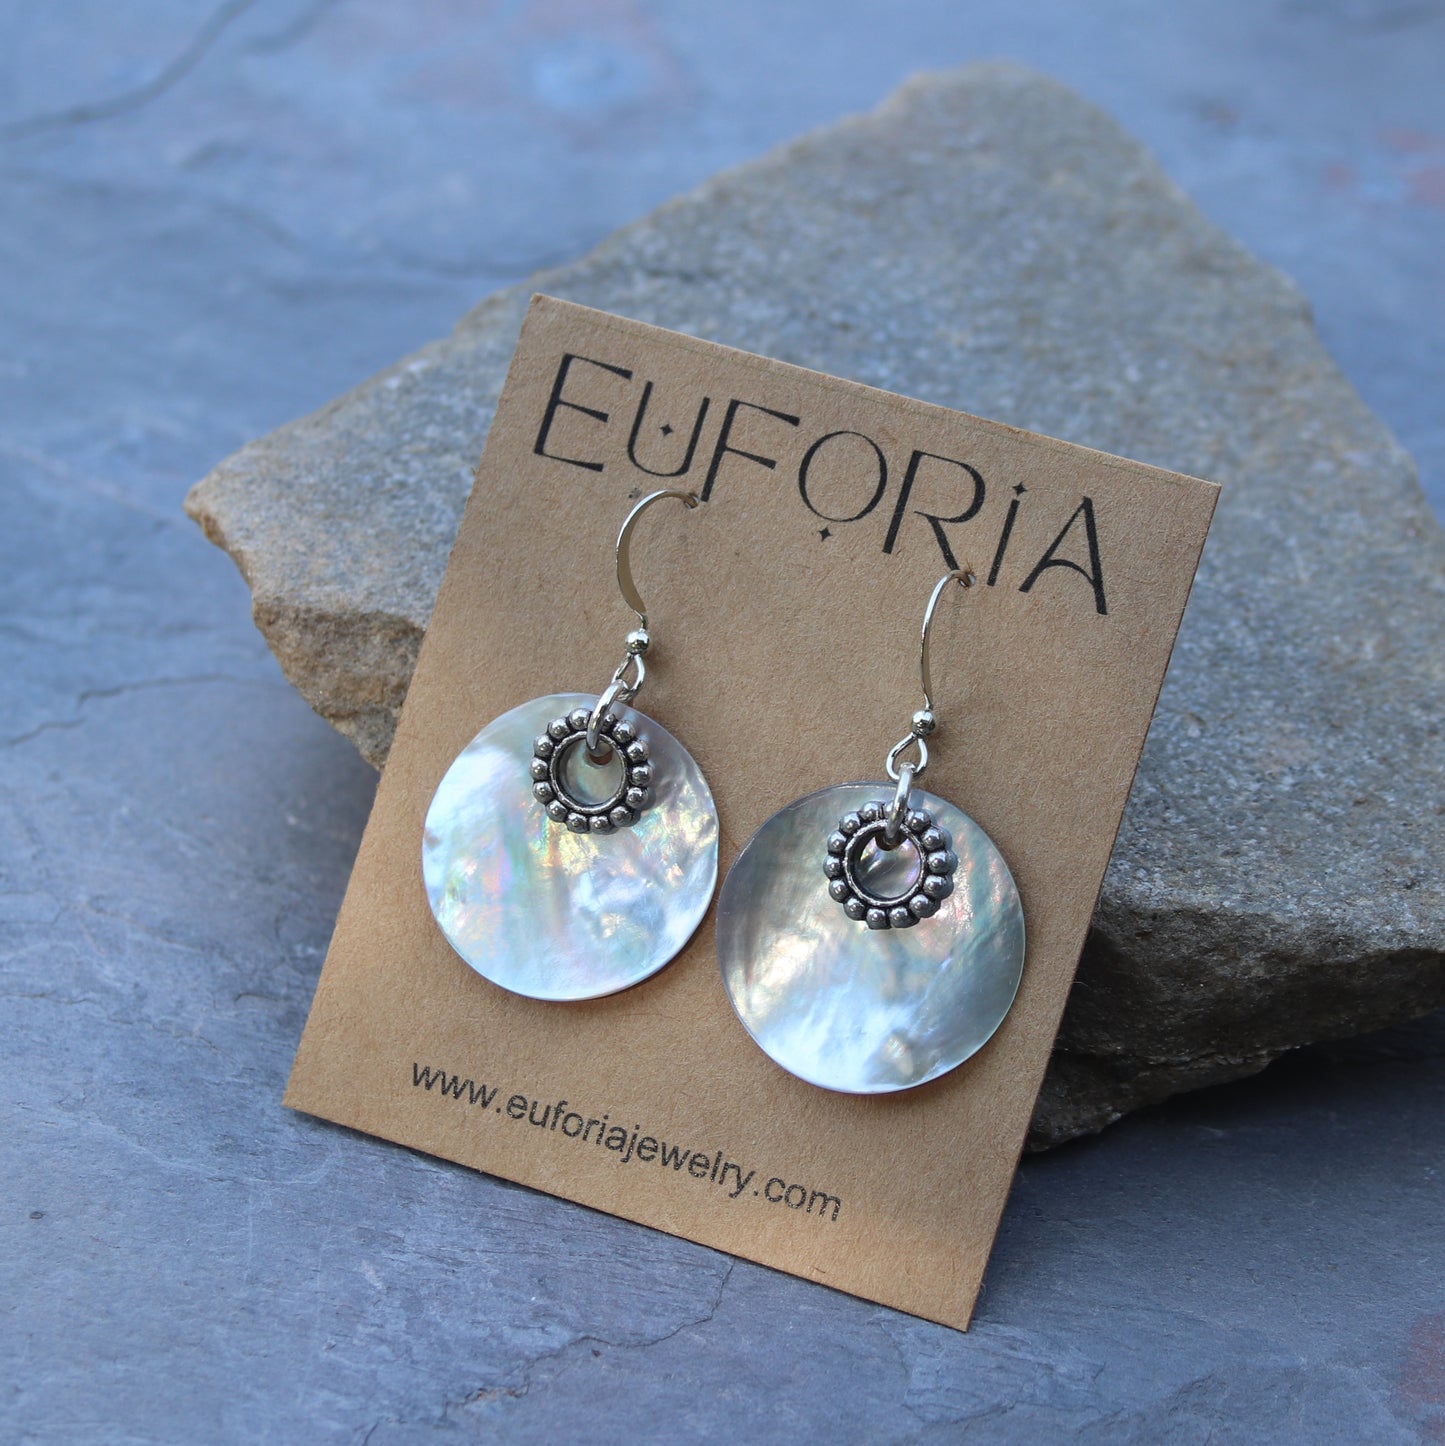 7/8" natural shell disk with pewter circle charm earrings. Stainless ear wire. Total length 1.5"